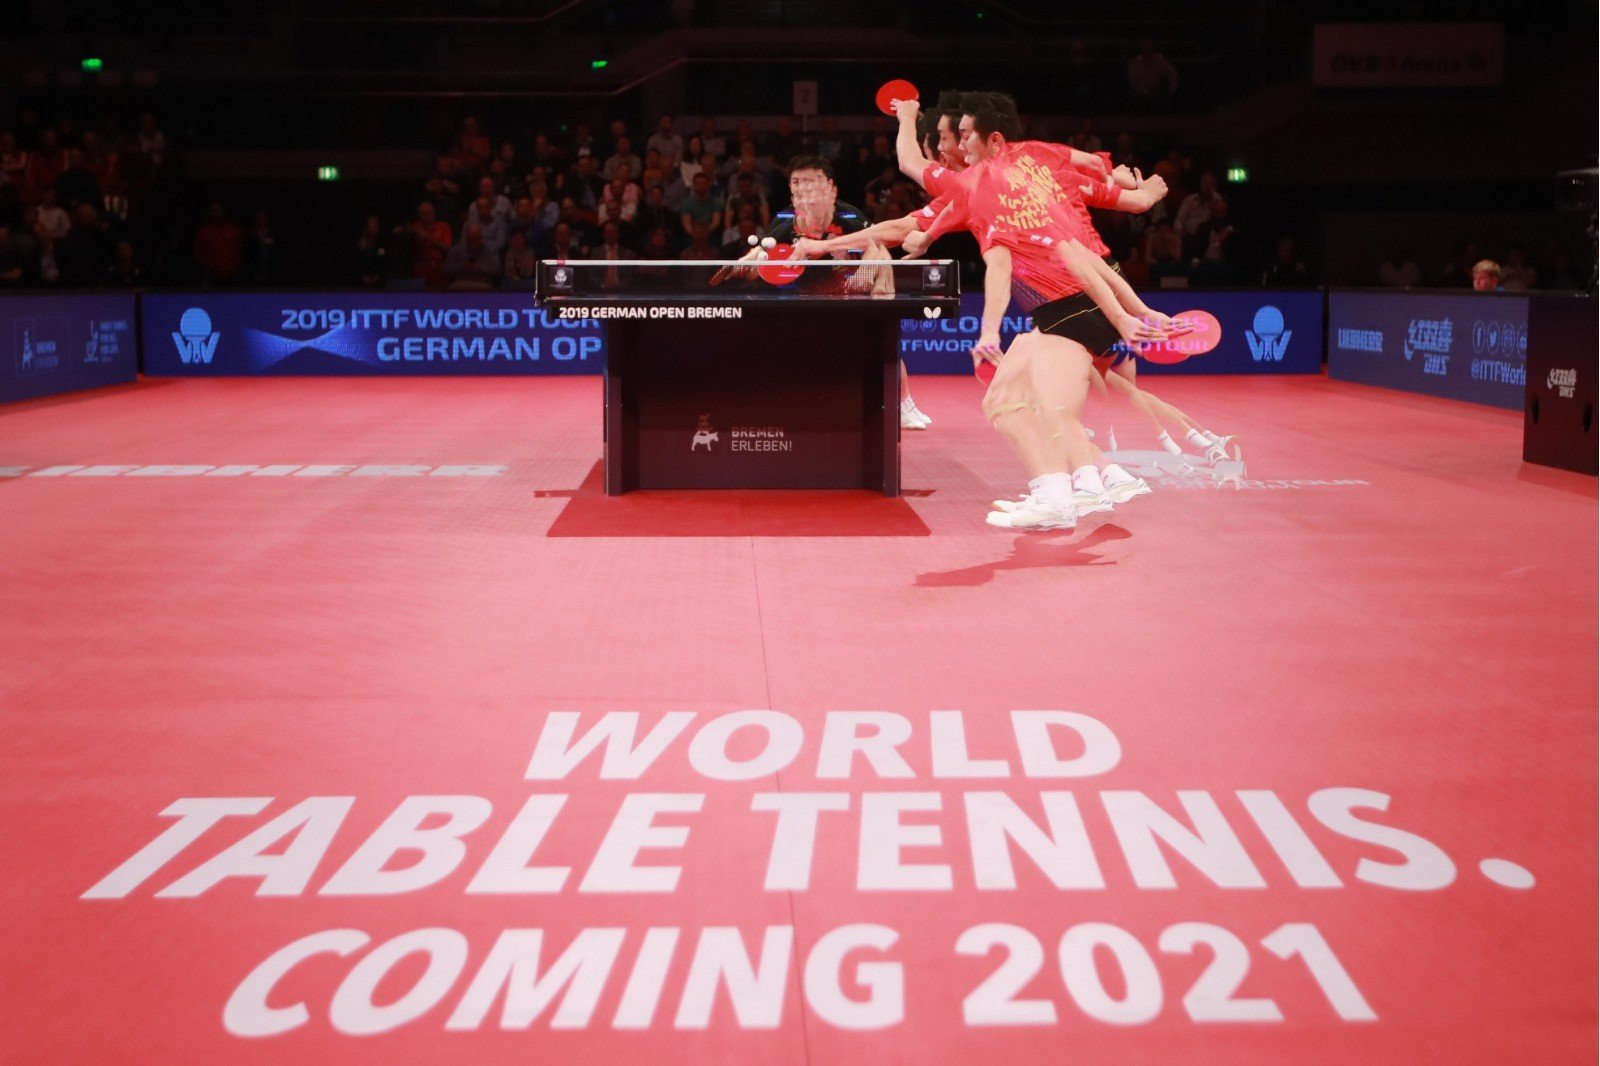 Bidding still open for cities to host 2021 World Table Tennis events 